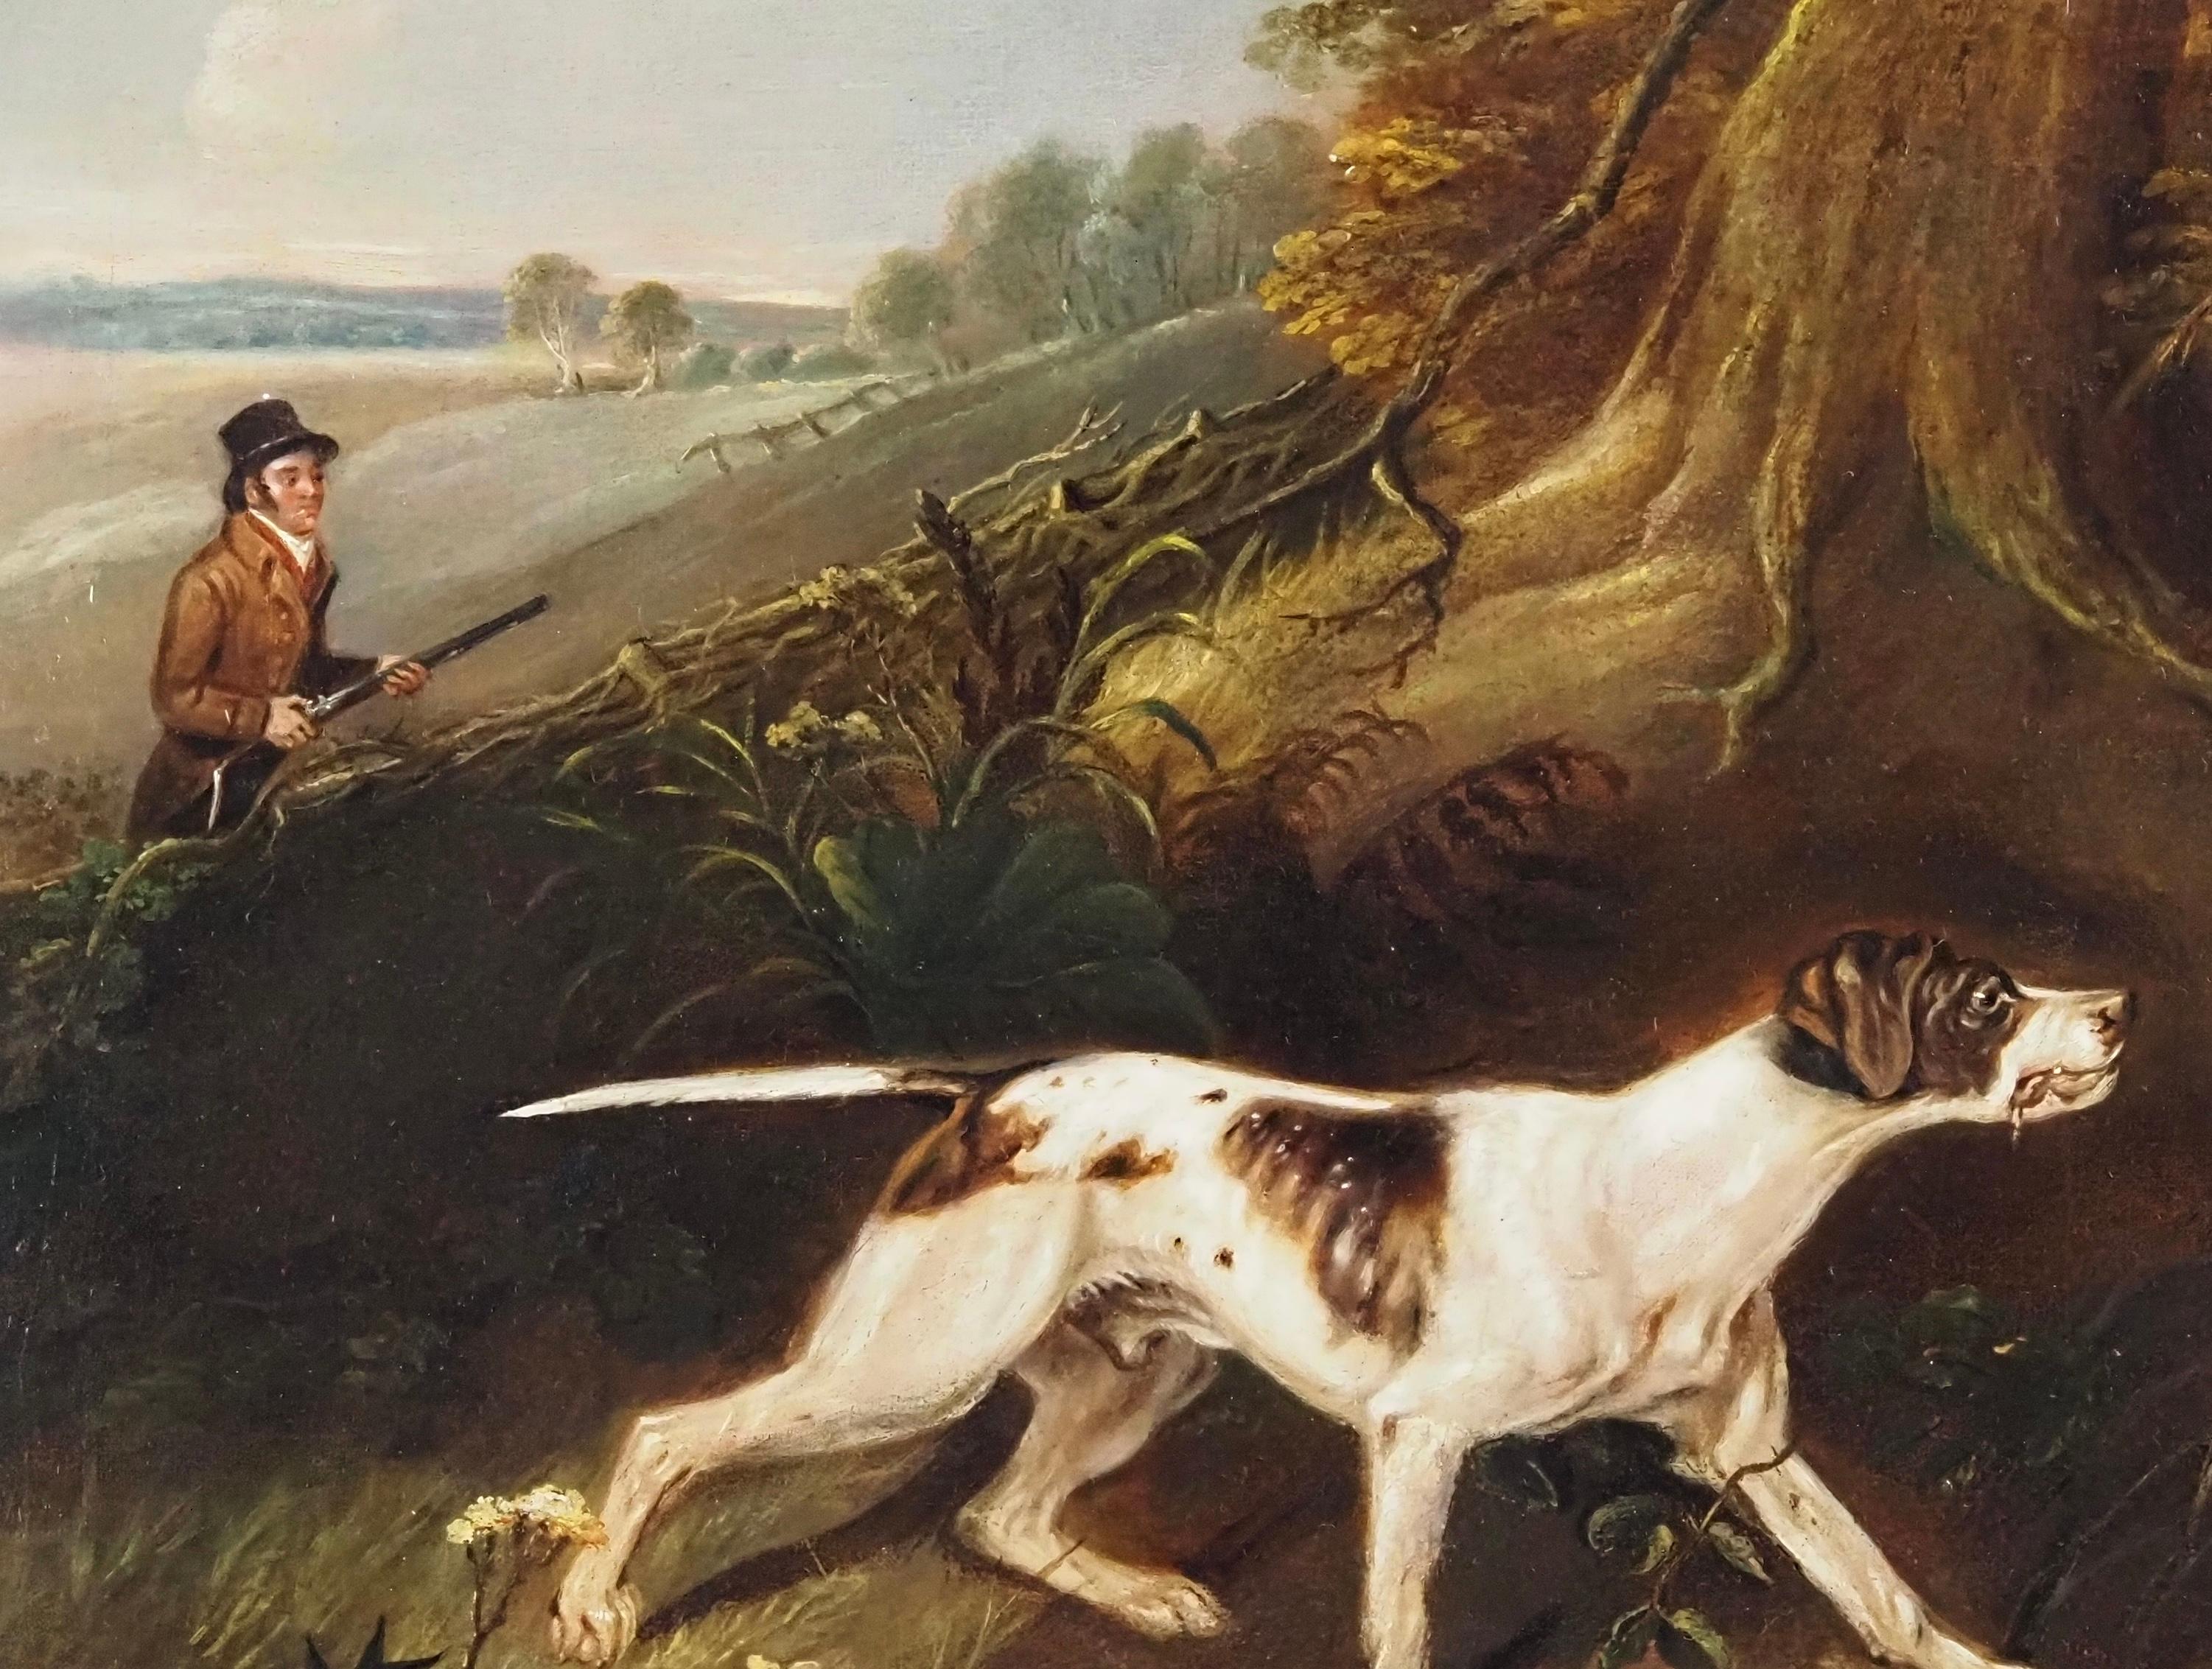 Philip Reinagle (1749-1833)
A huntsman with pointer in a landscape
Oil on canvas
Canvas size - 17 x 23 in
Framed size - 22 x 28 in

Philip Reinagle RA (1749-1833) was an English painter of animals, landscapes, and botanical scenes. The son of a